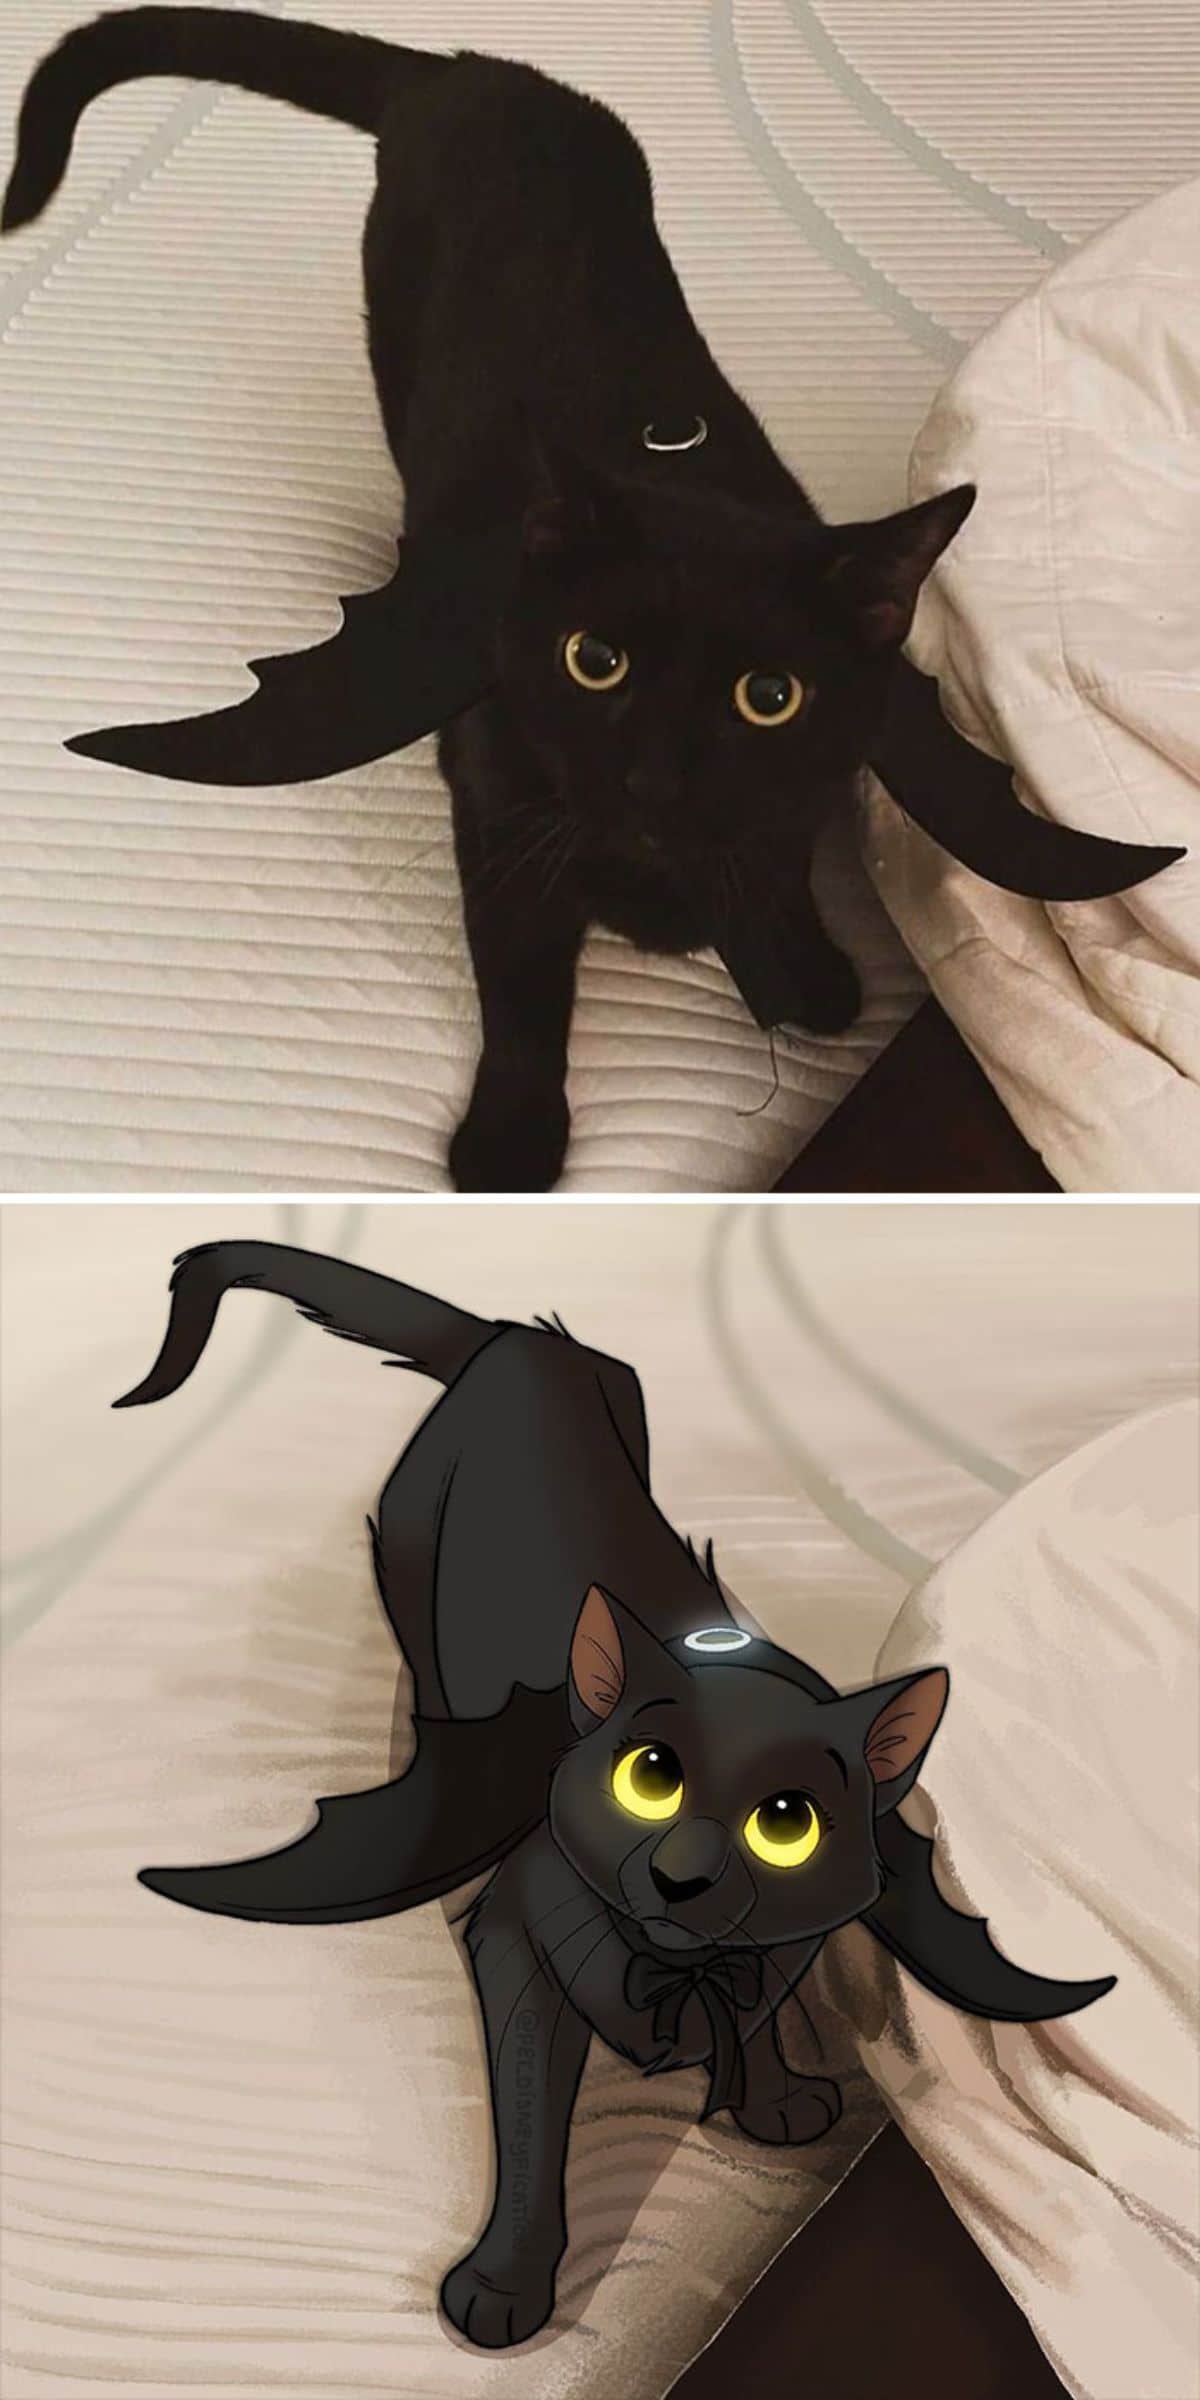 real photo and cartoon image of a black cat on a white bed wearing black bat wings